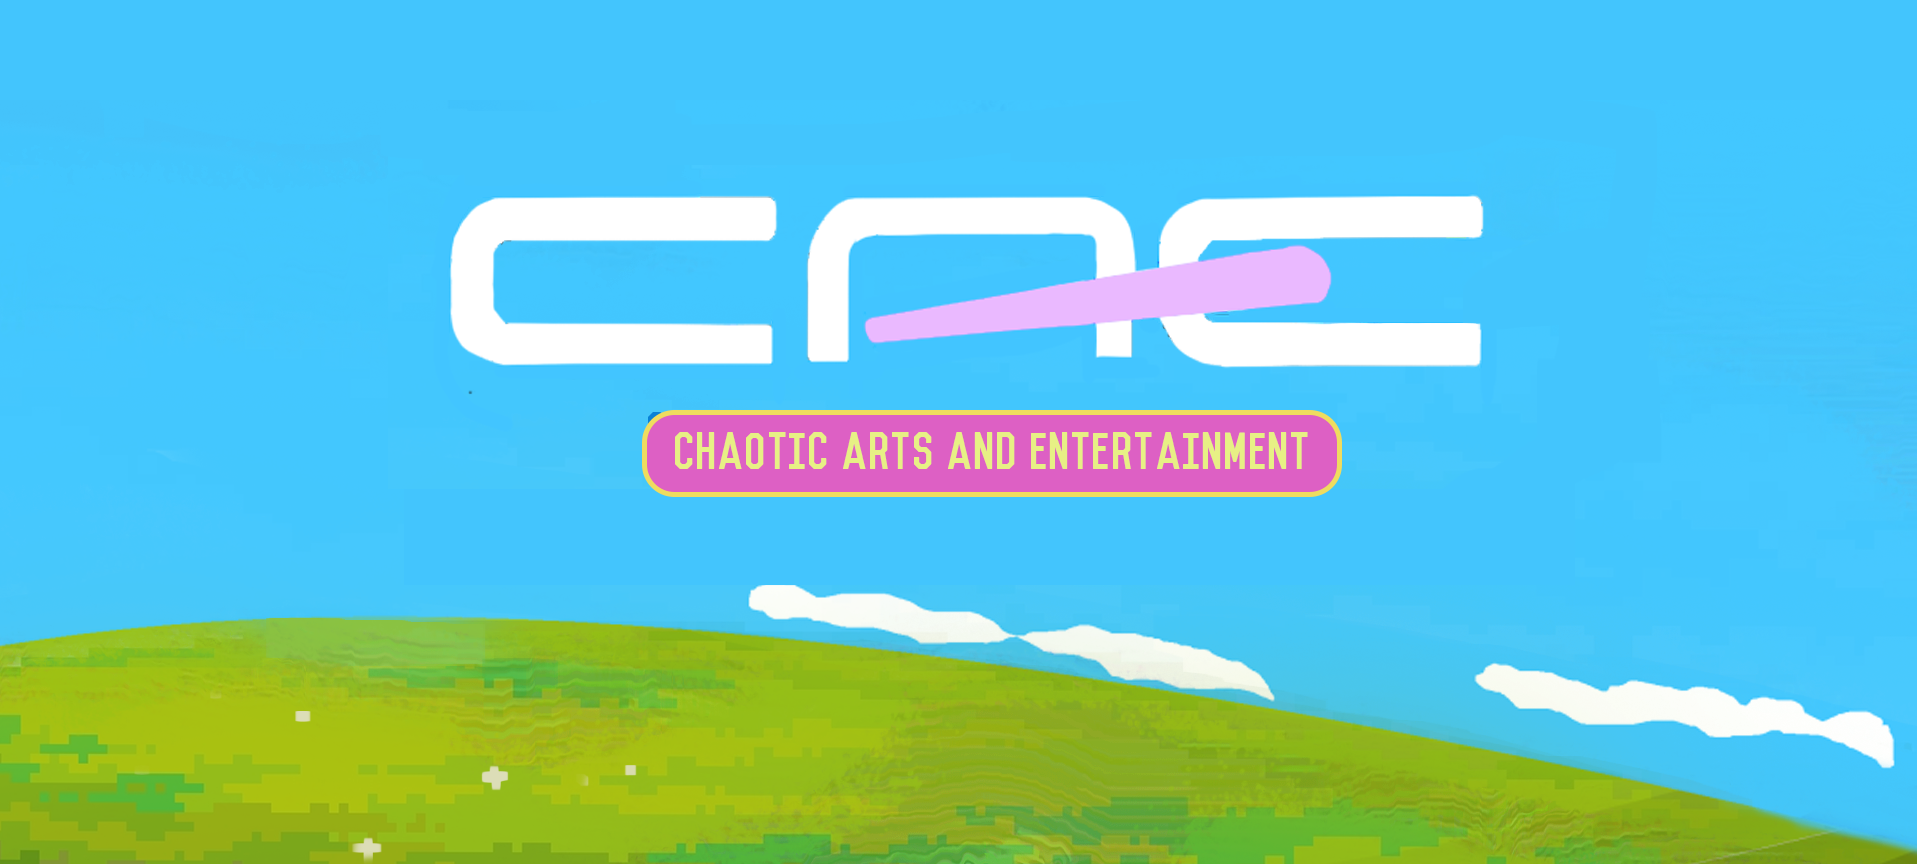 [Group24] - Chaotic Arts & Entertainment